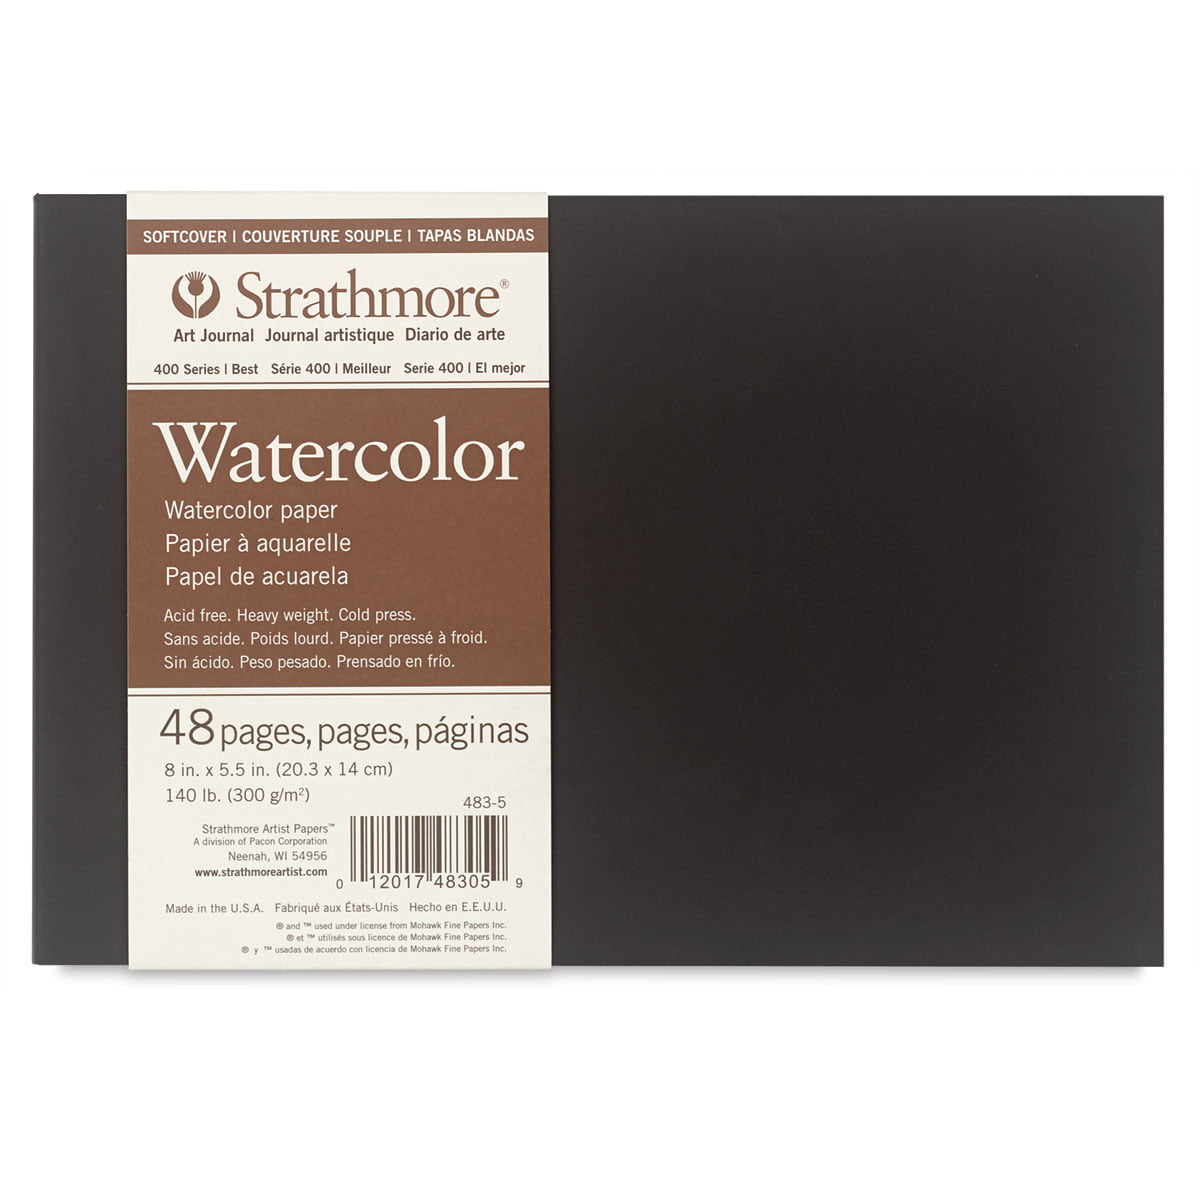 Strathmore 500 Series Softcover Art Writing Journal 64 Sheets 5.5x8 Lined